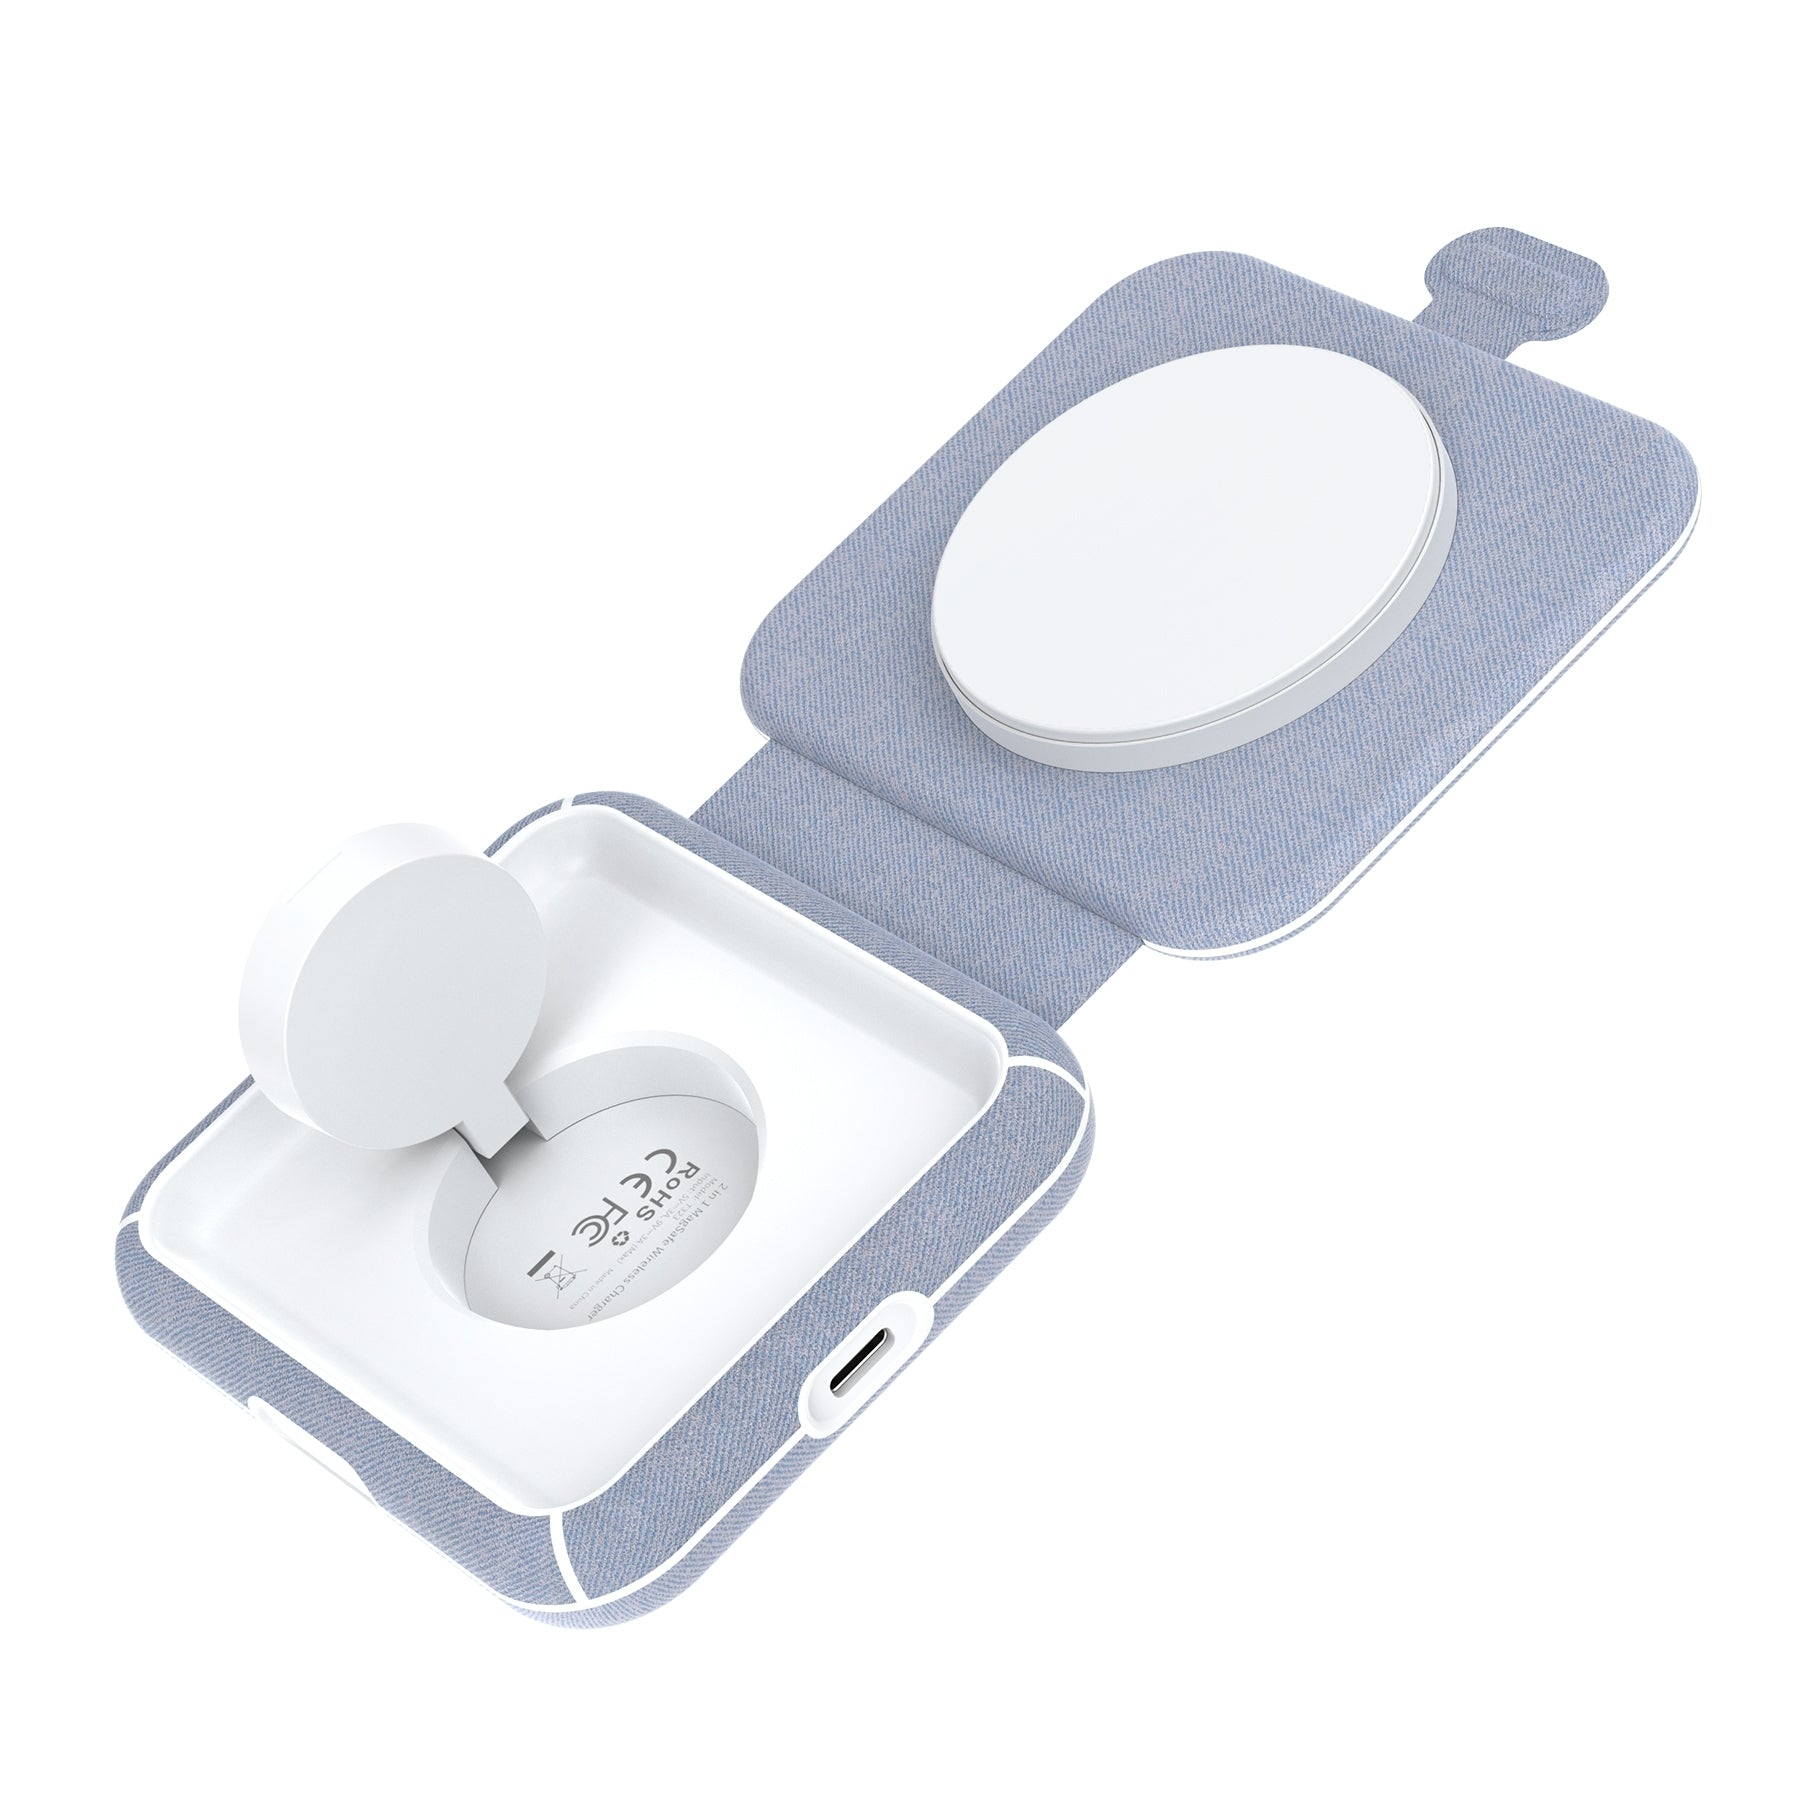 CHOETECH T323 2-in-1 Magsafe & MFI Wireless Charger